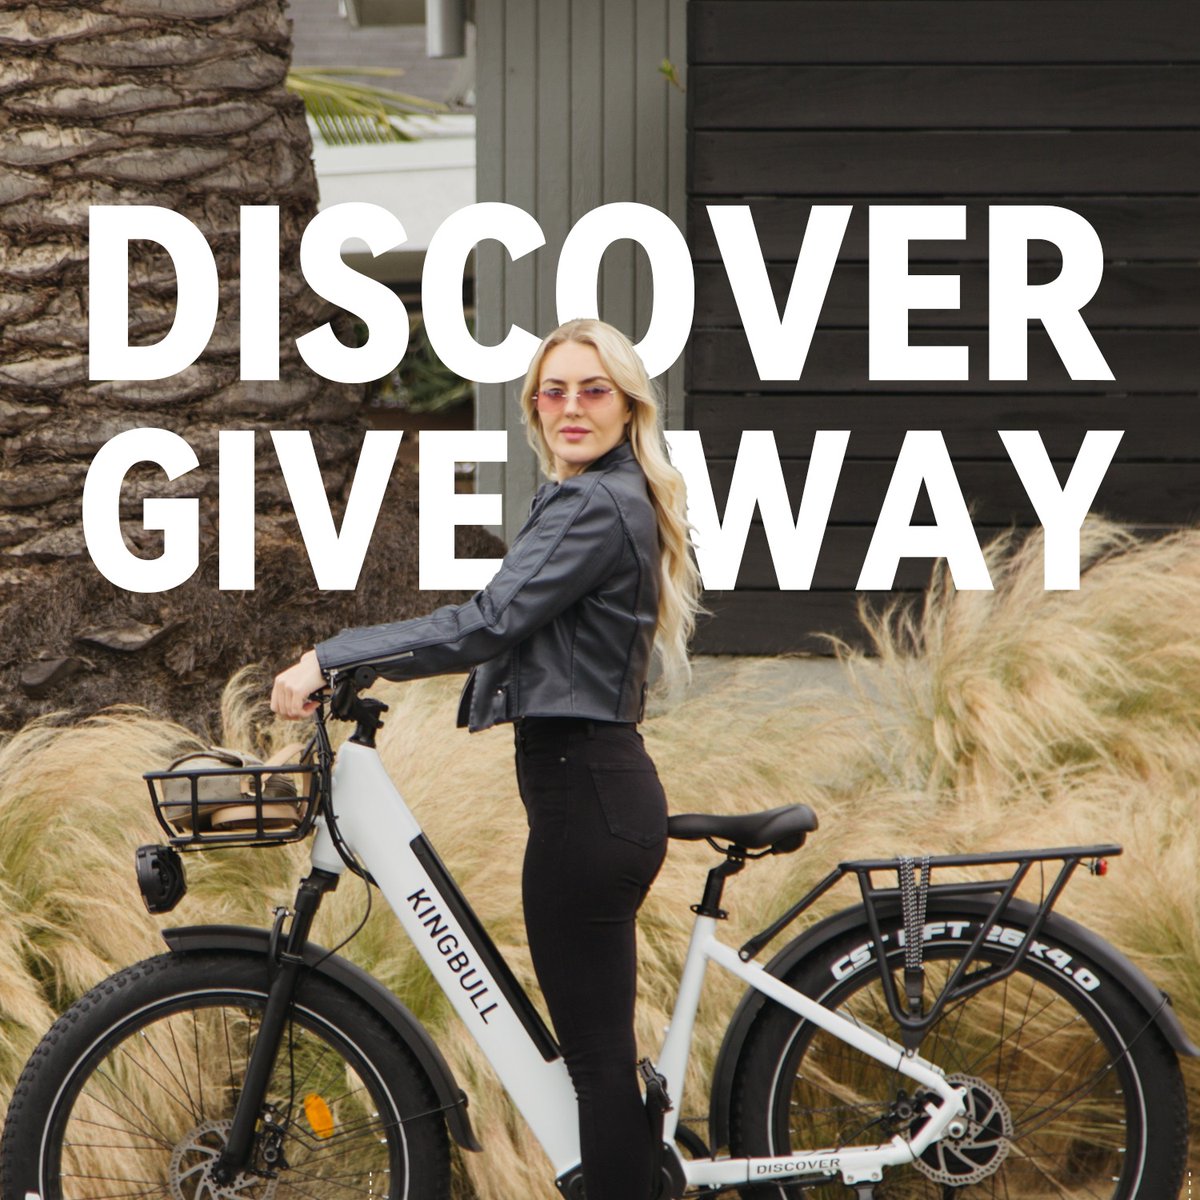 🎊Calling all riders🎁Discover(ST) drawing lives now！

Simply follow the steps to enter and the winner will be drawn randomly on June 7th.
Prize: a Discover(st) ebike🚲 and discount coupons💴

Win Now🔗link in bio
#Giveaway #Luckdraw #KingbullBike #FaceTheWind #KingbullDiscover